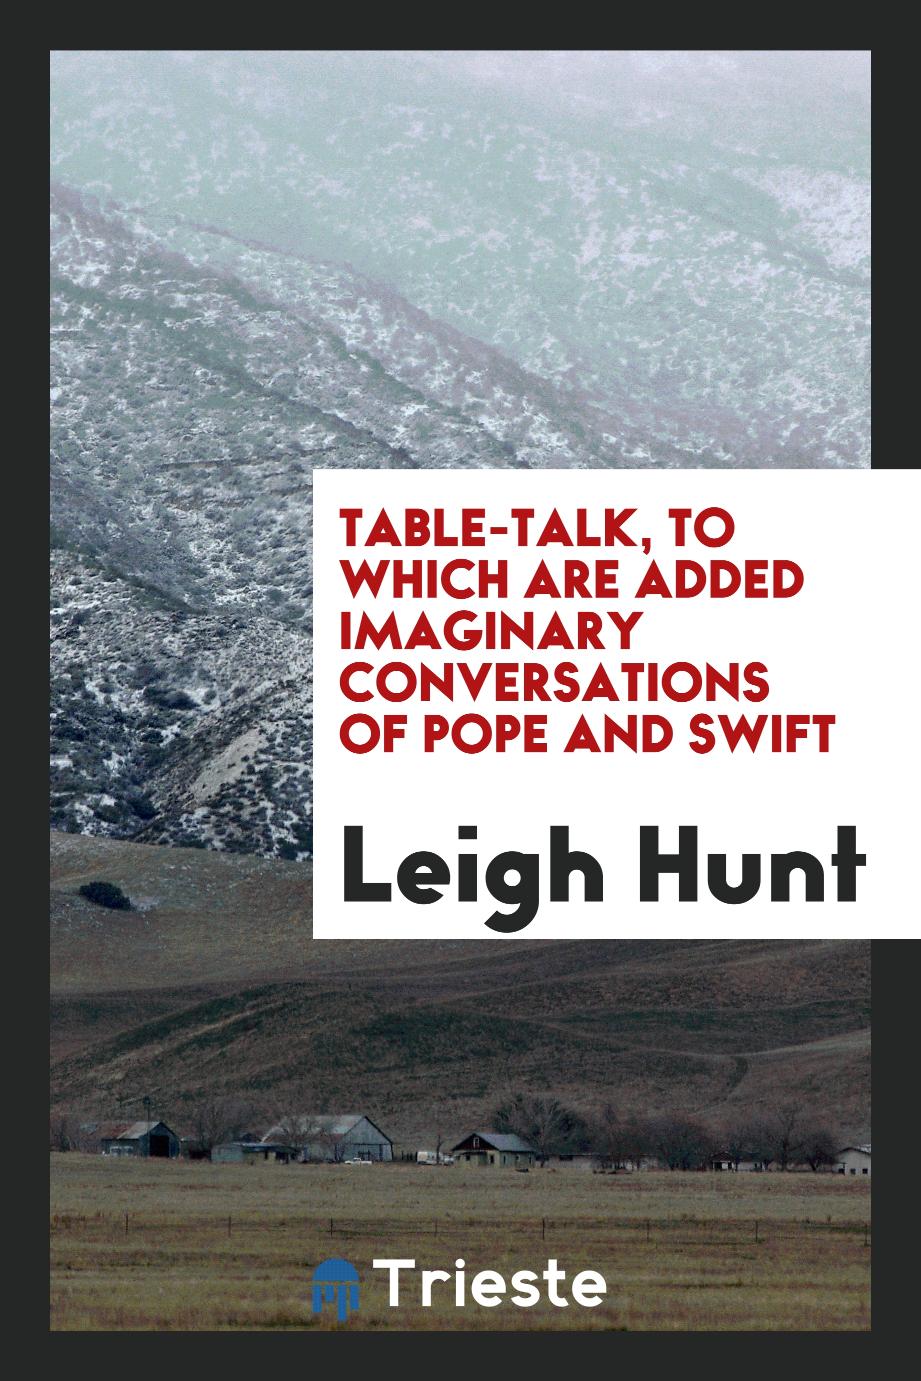 Table-talk, to which are added Imaginary conversations of Pope and Swift